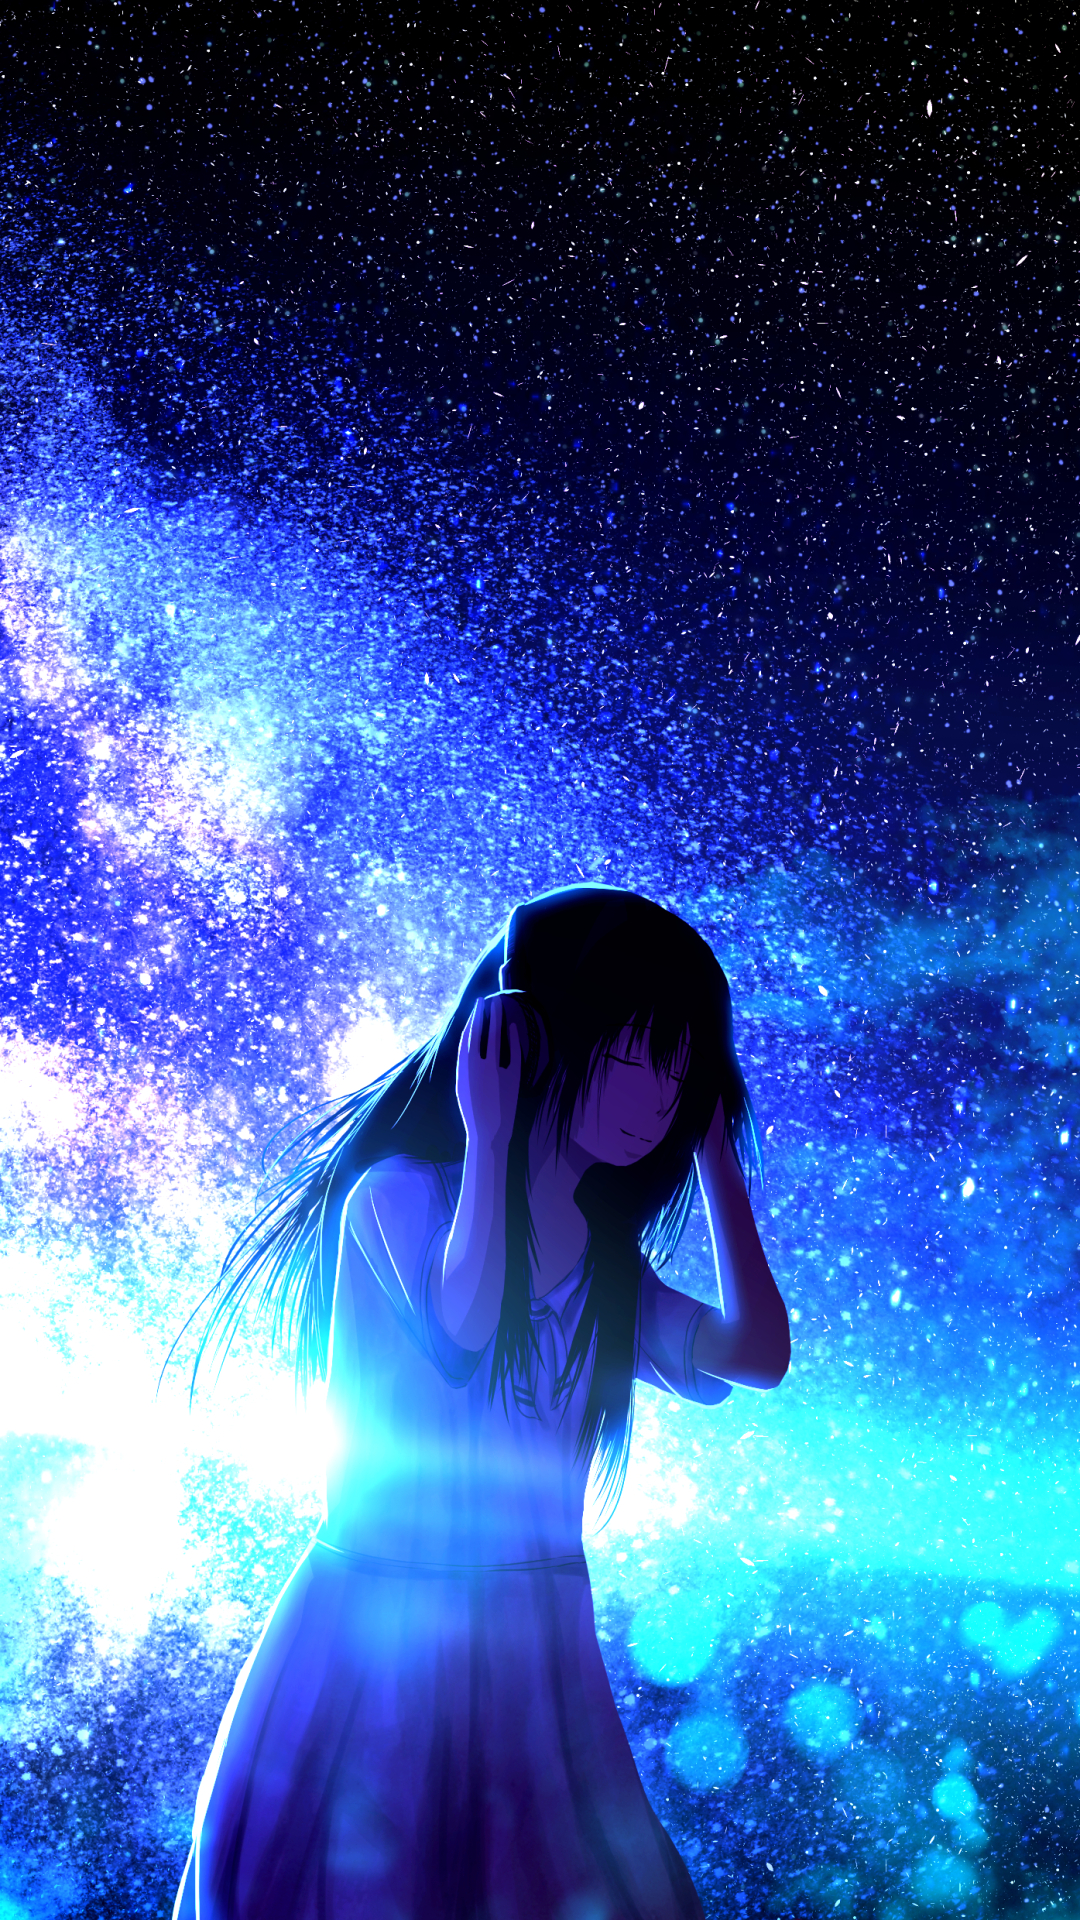 Girl listening to music on beautiful starry night by クメキ - Mobile Abyss